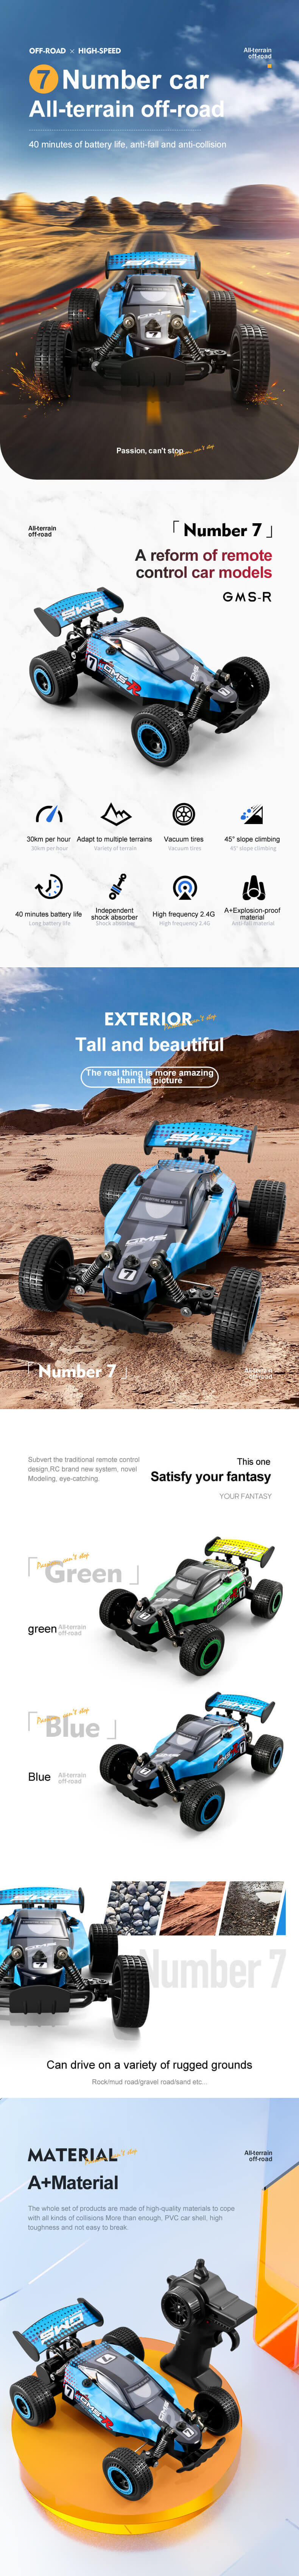 4D-C8 Remote Control Racing Car Toy for Kids